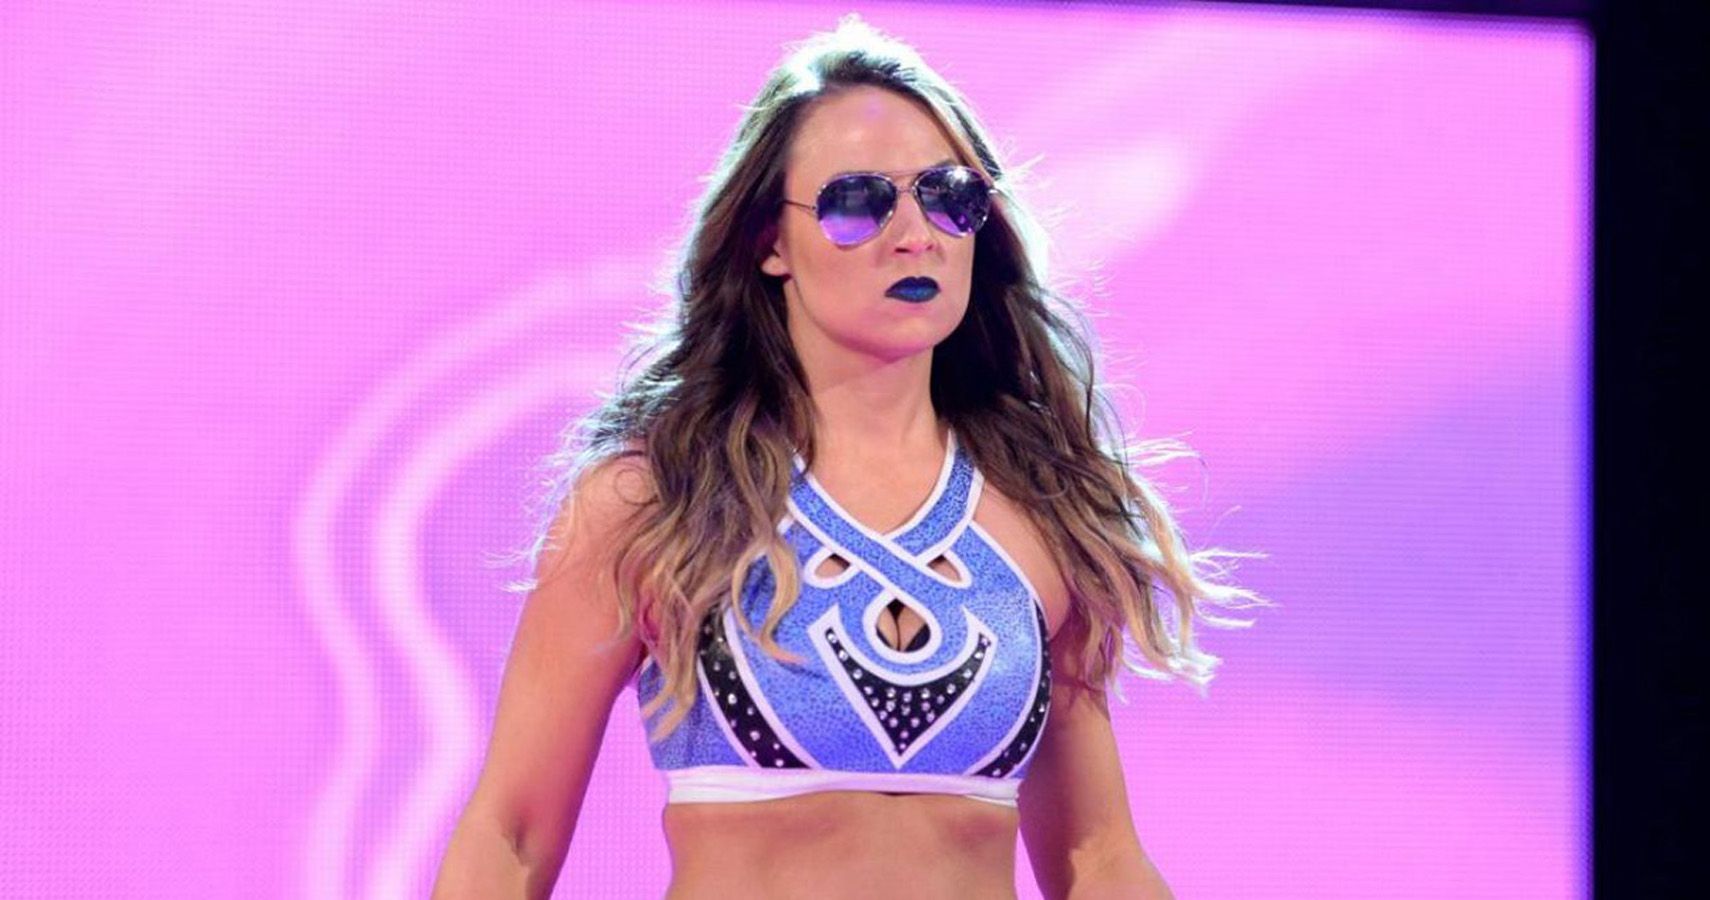 The 10 Best Female Wrestlers In The History of NXT